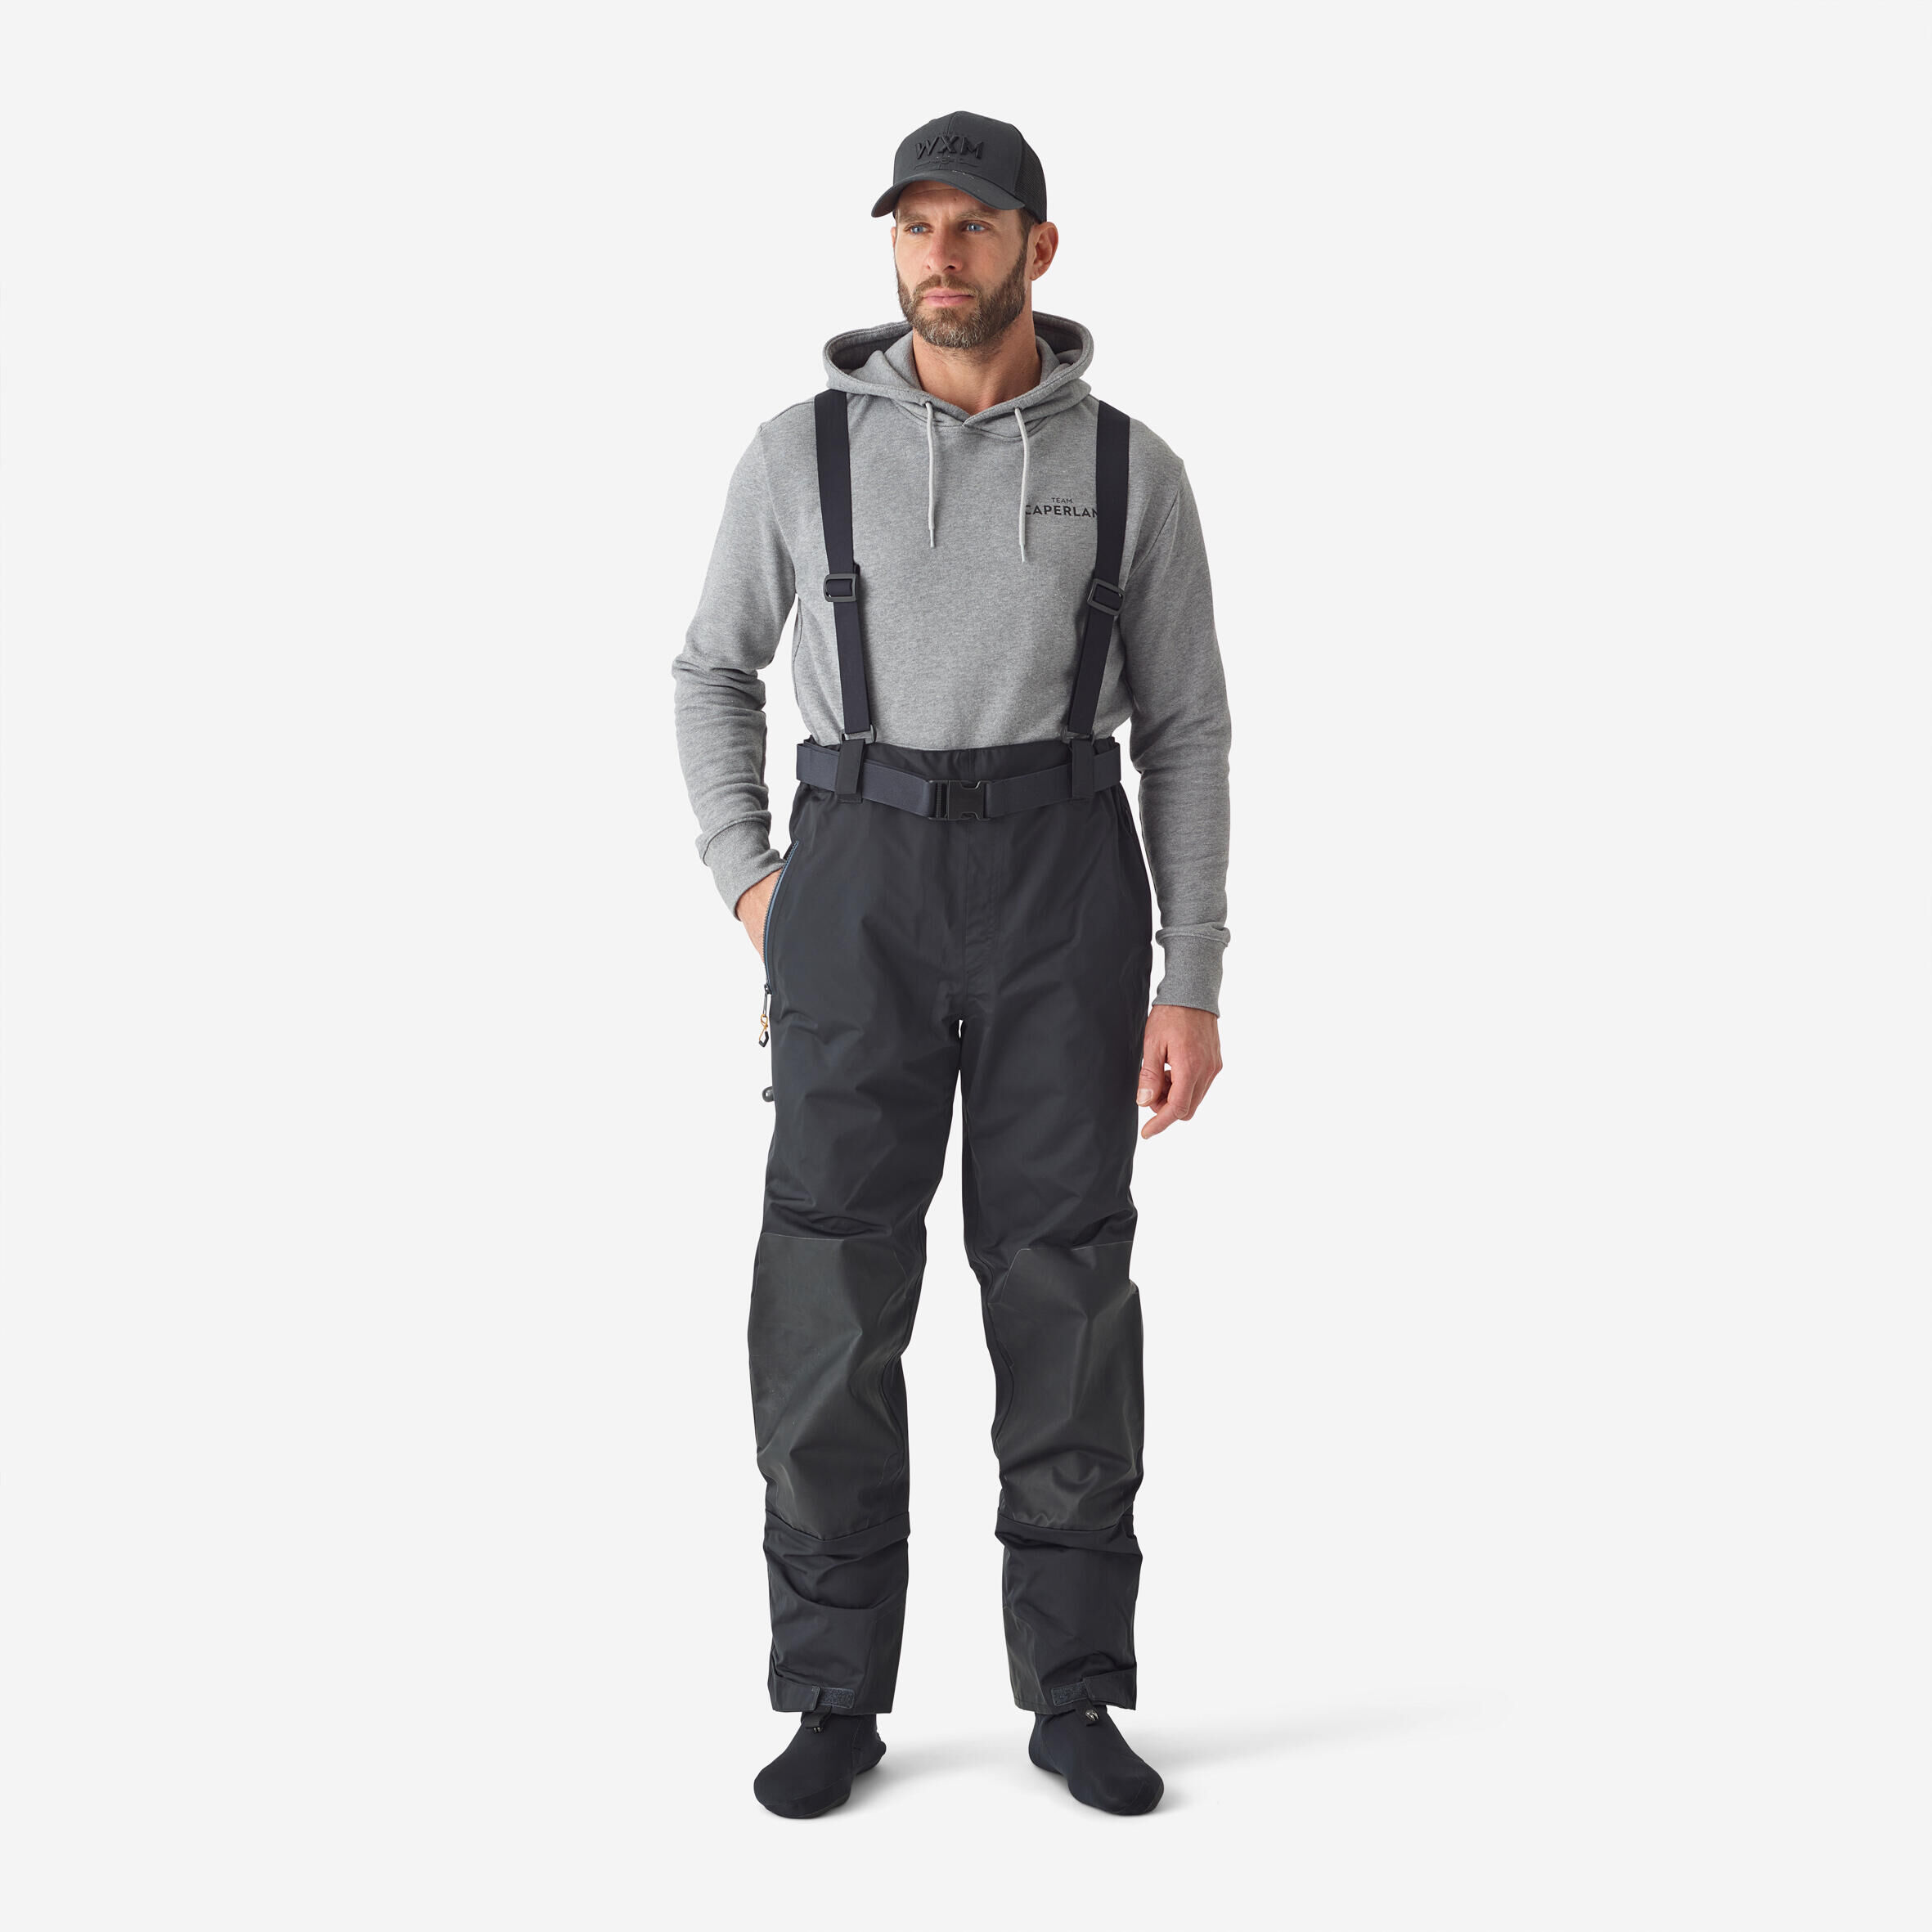 CAPERLAN Waterproof, breathable wading trousers with neoprene booties - TW 900 BR-S